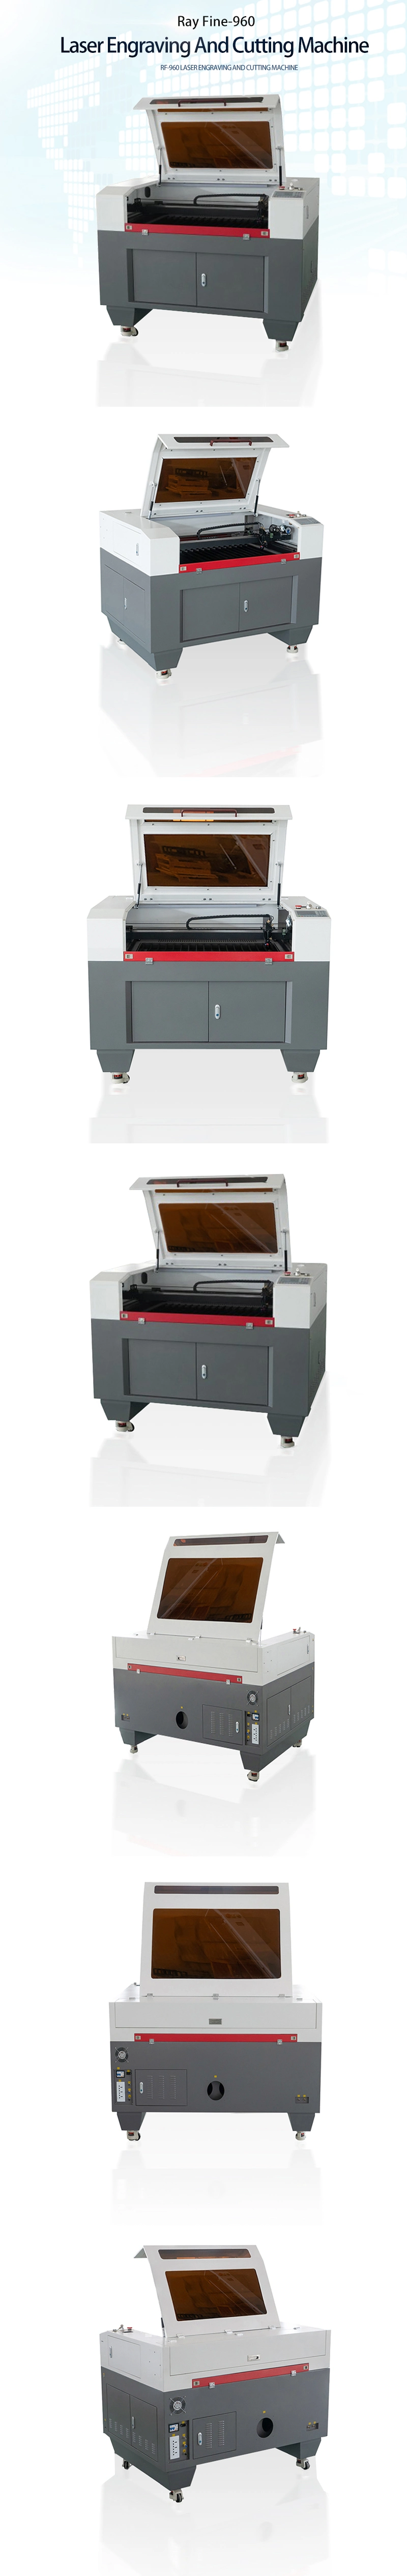 High Quality Wood Engraving Machine by Laser Machine 1390 6090